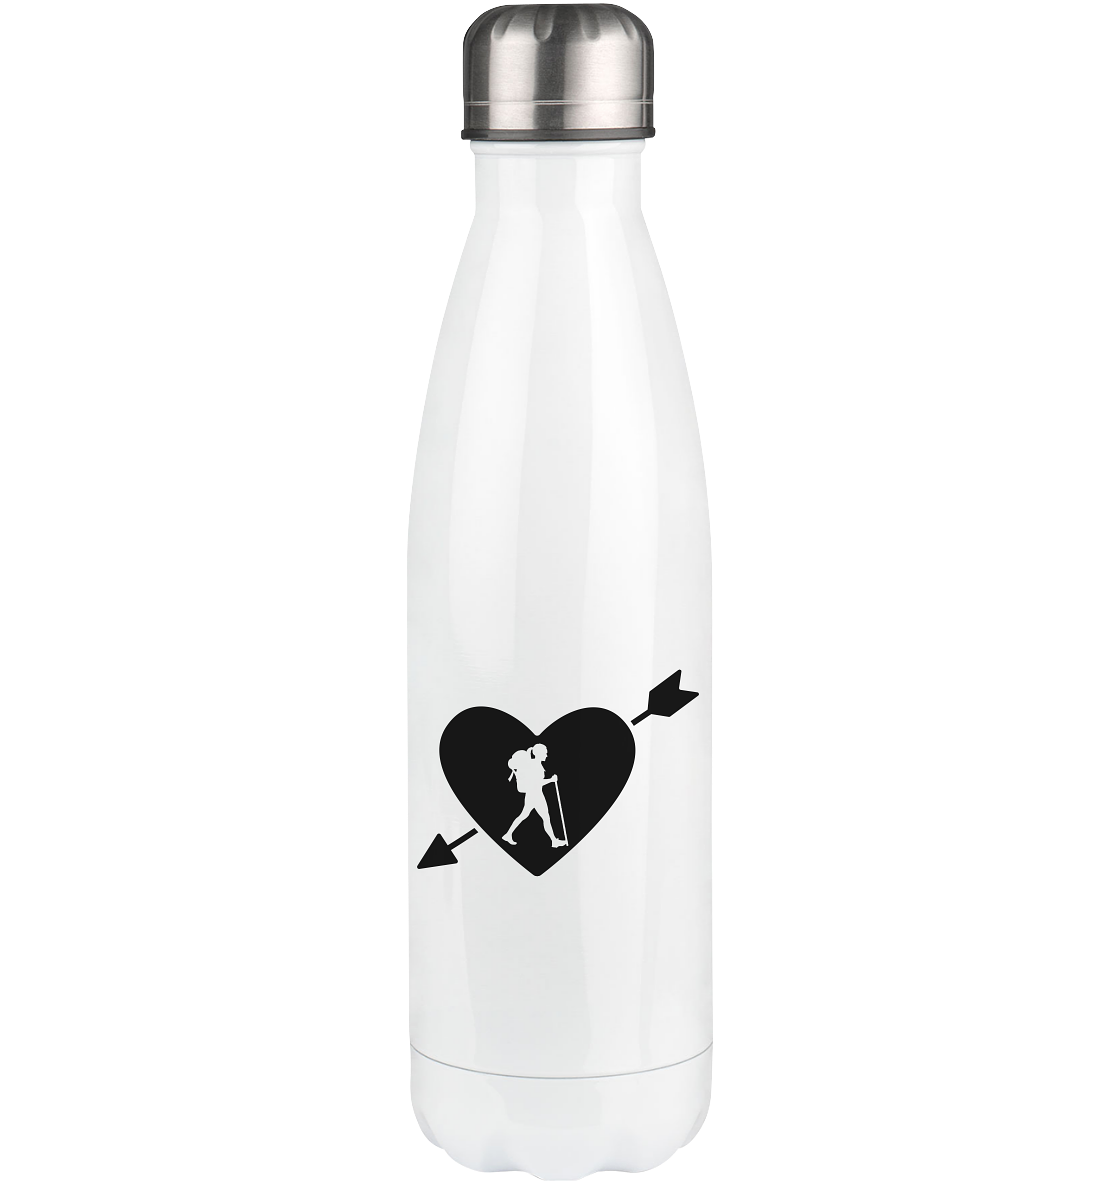 Arrow Heart and Hiking 1 - Edelstahl Thermosflasche wandern 500ml